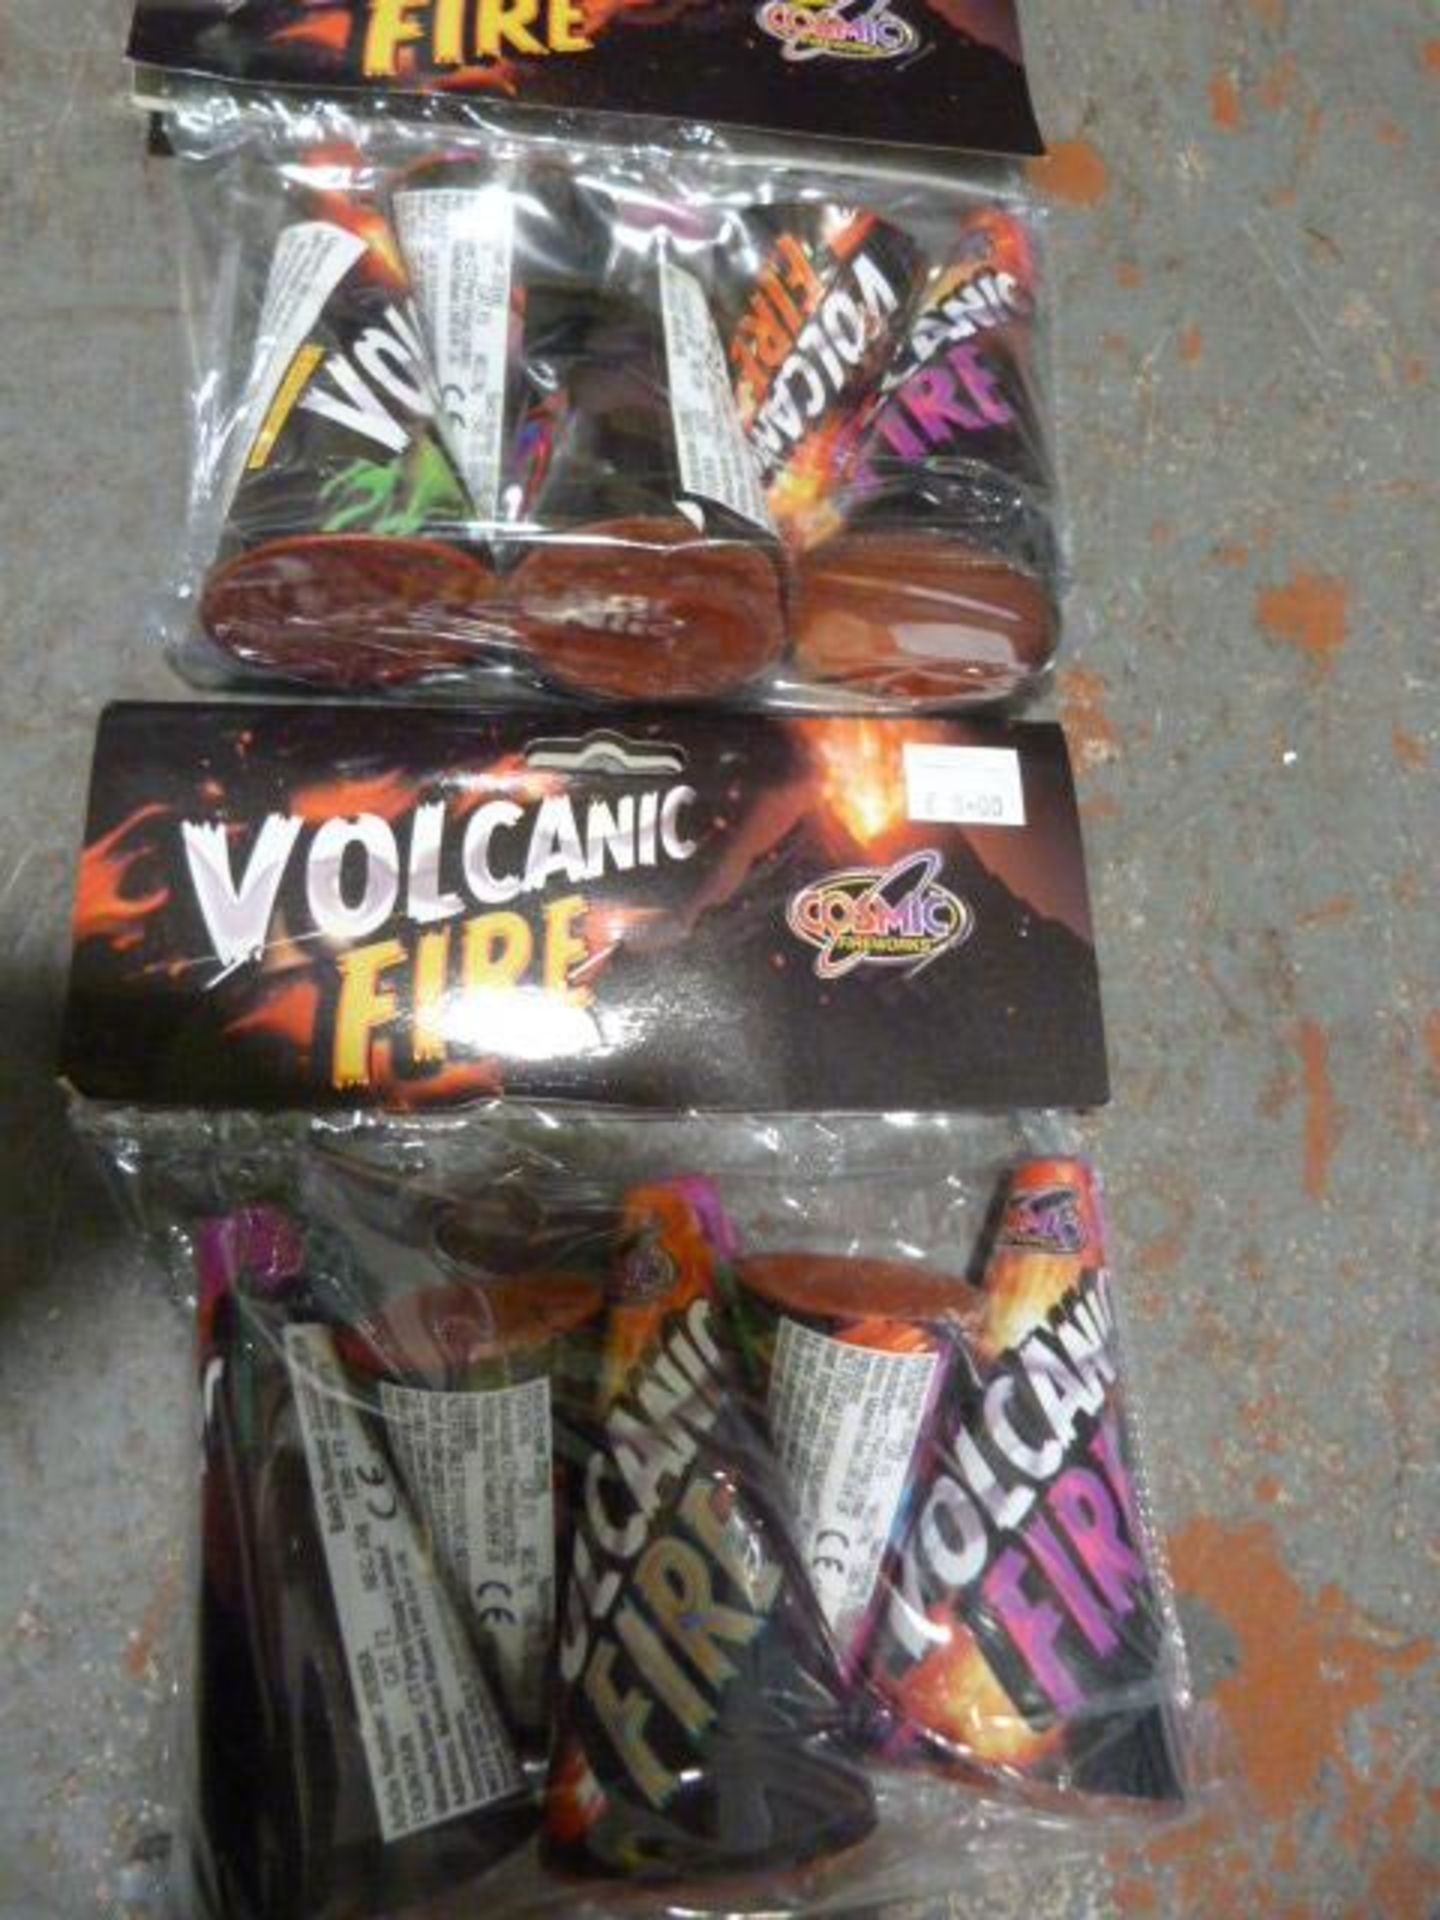 *Two Packs of 5 Volcanic Fire Fireworks